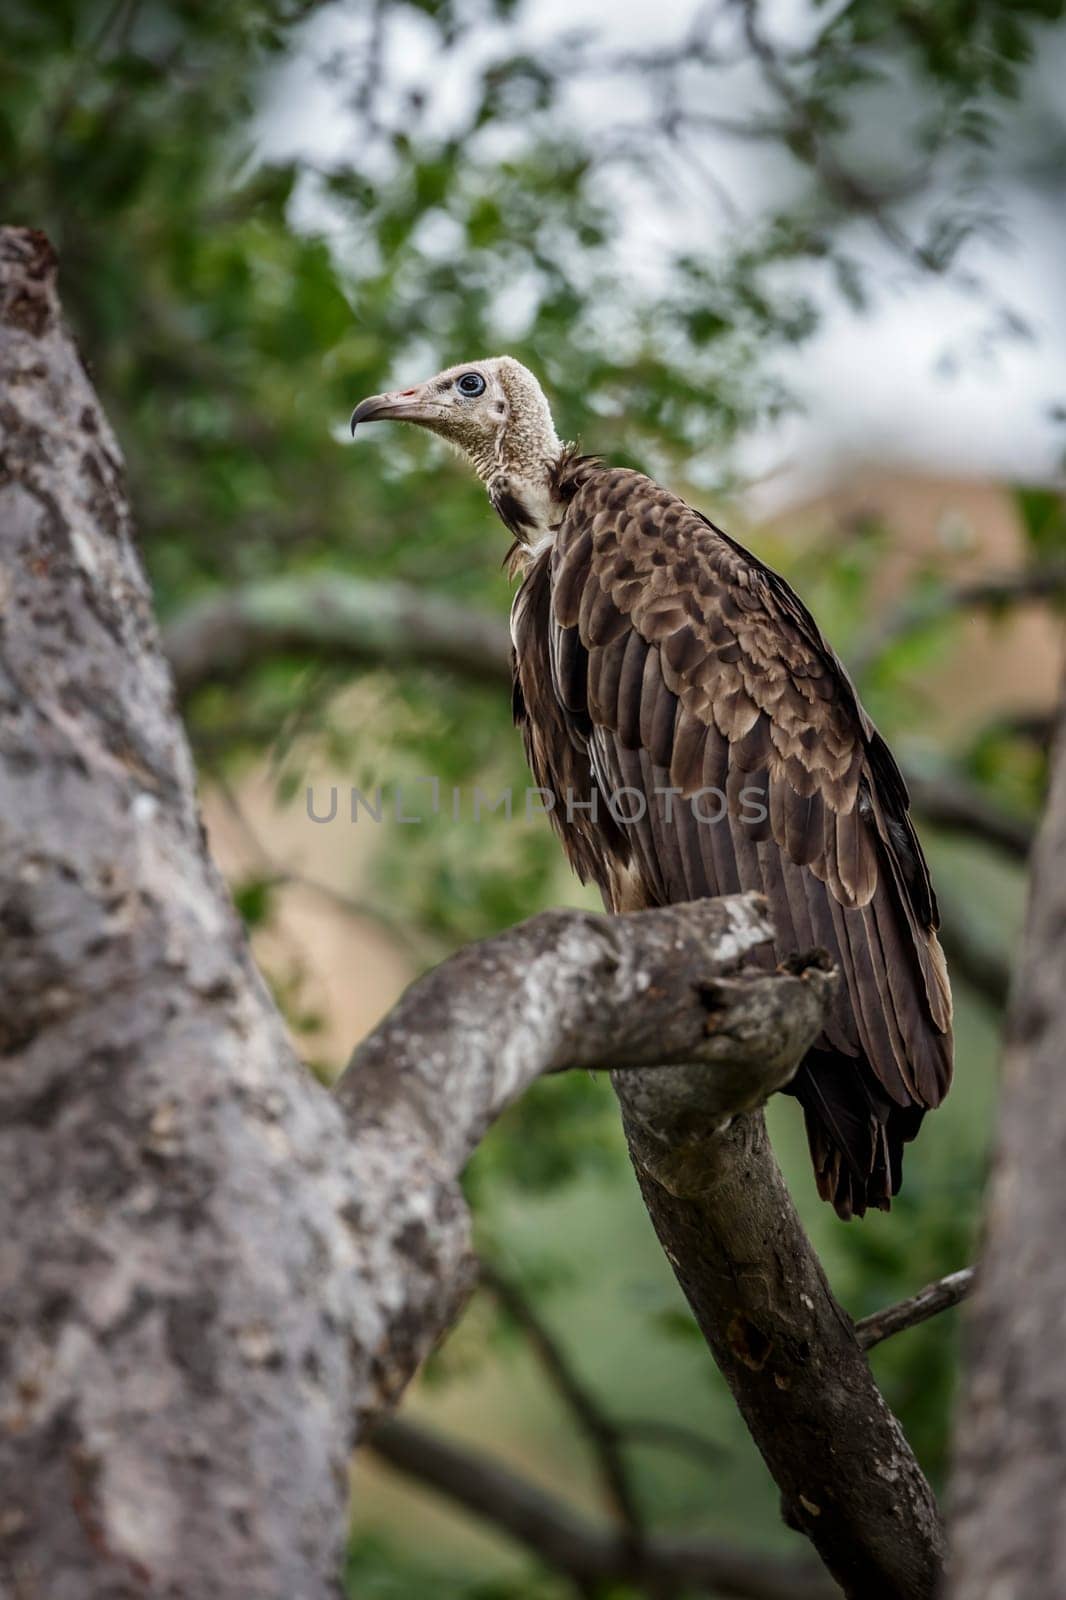 Hooded vulture in Kruger National park, South Africa by PACOCOMO